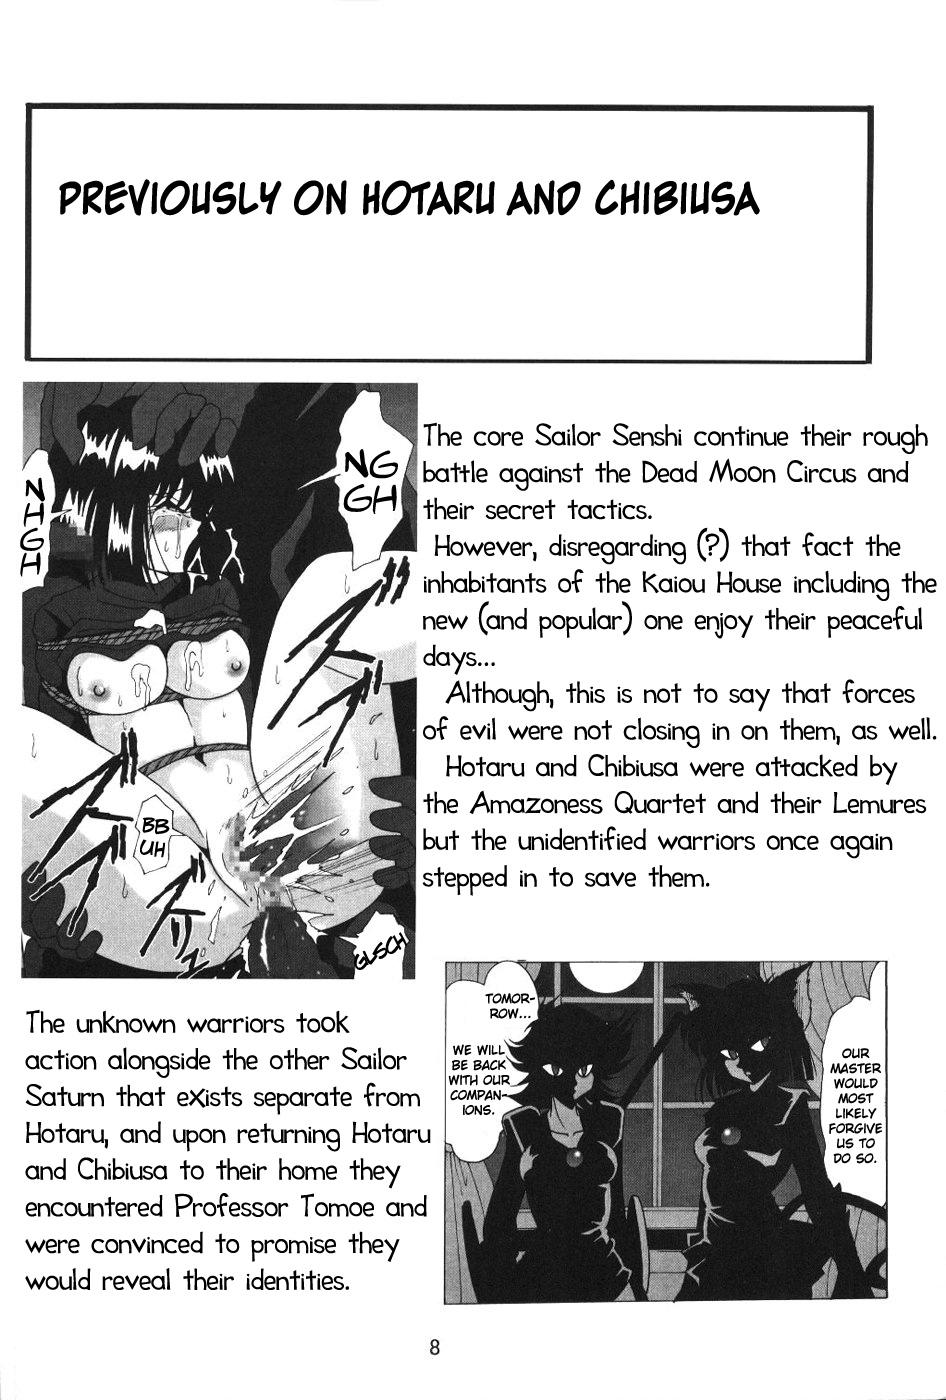 Fitness Silent Saturn SS vol. 7 - Sailor moon Chicks - Page 8